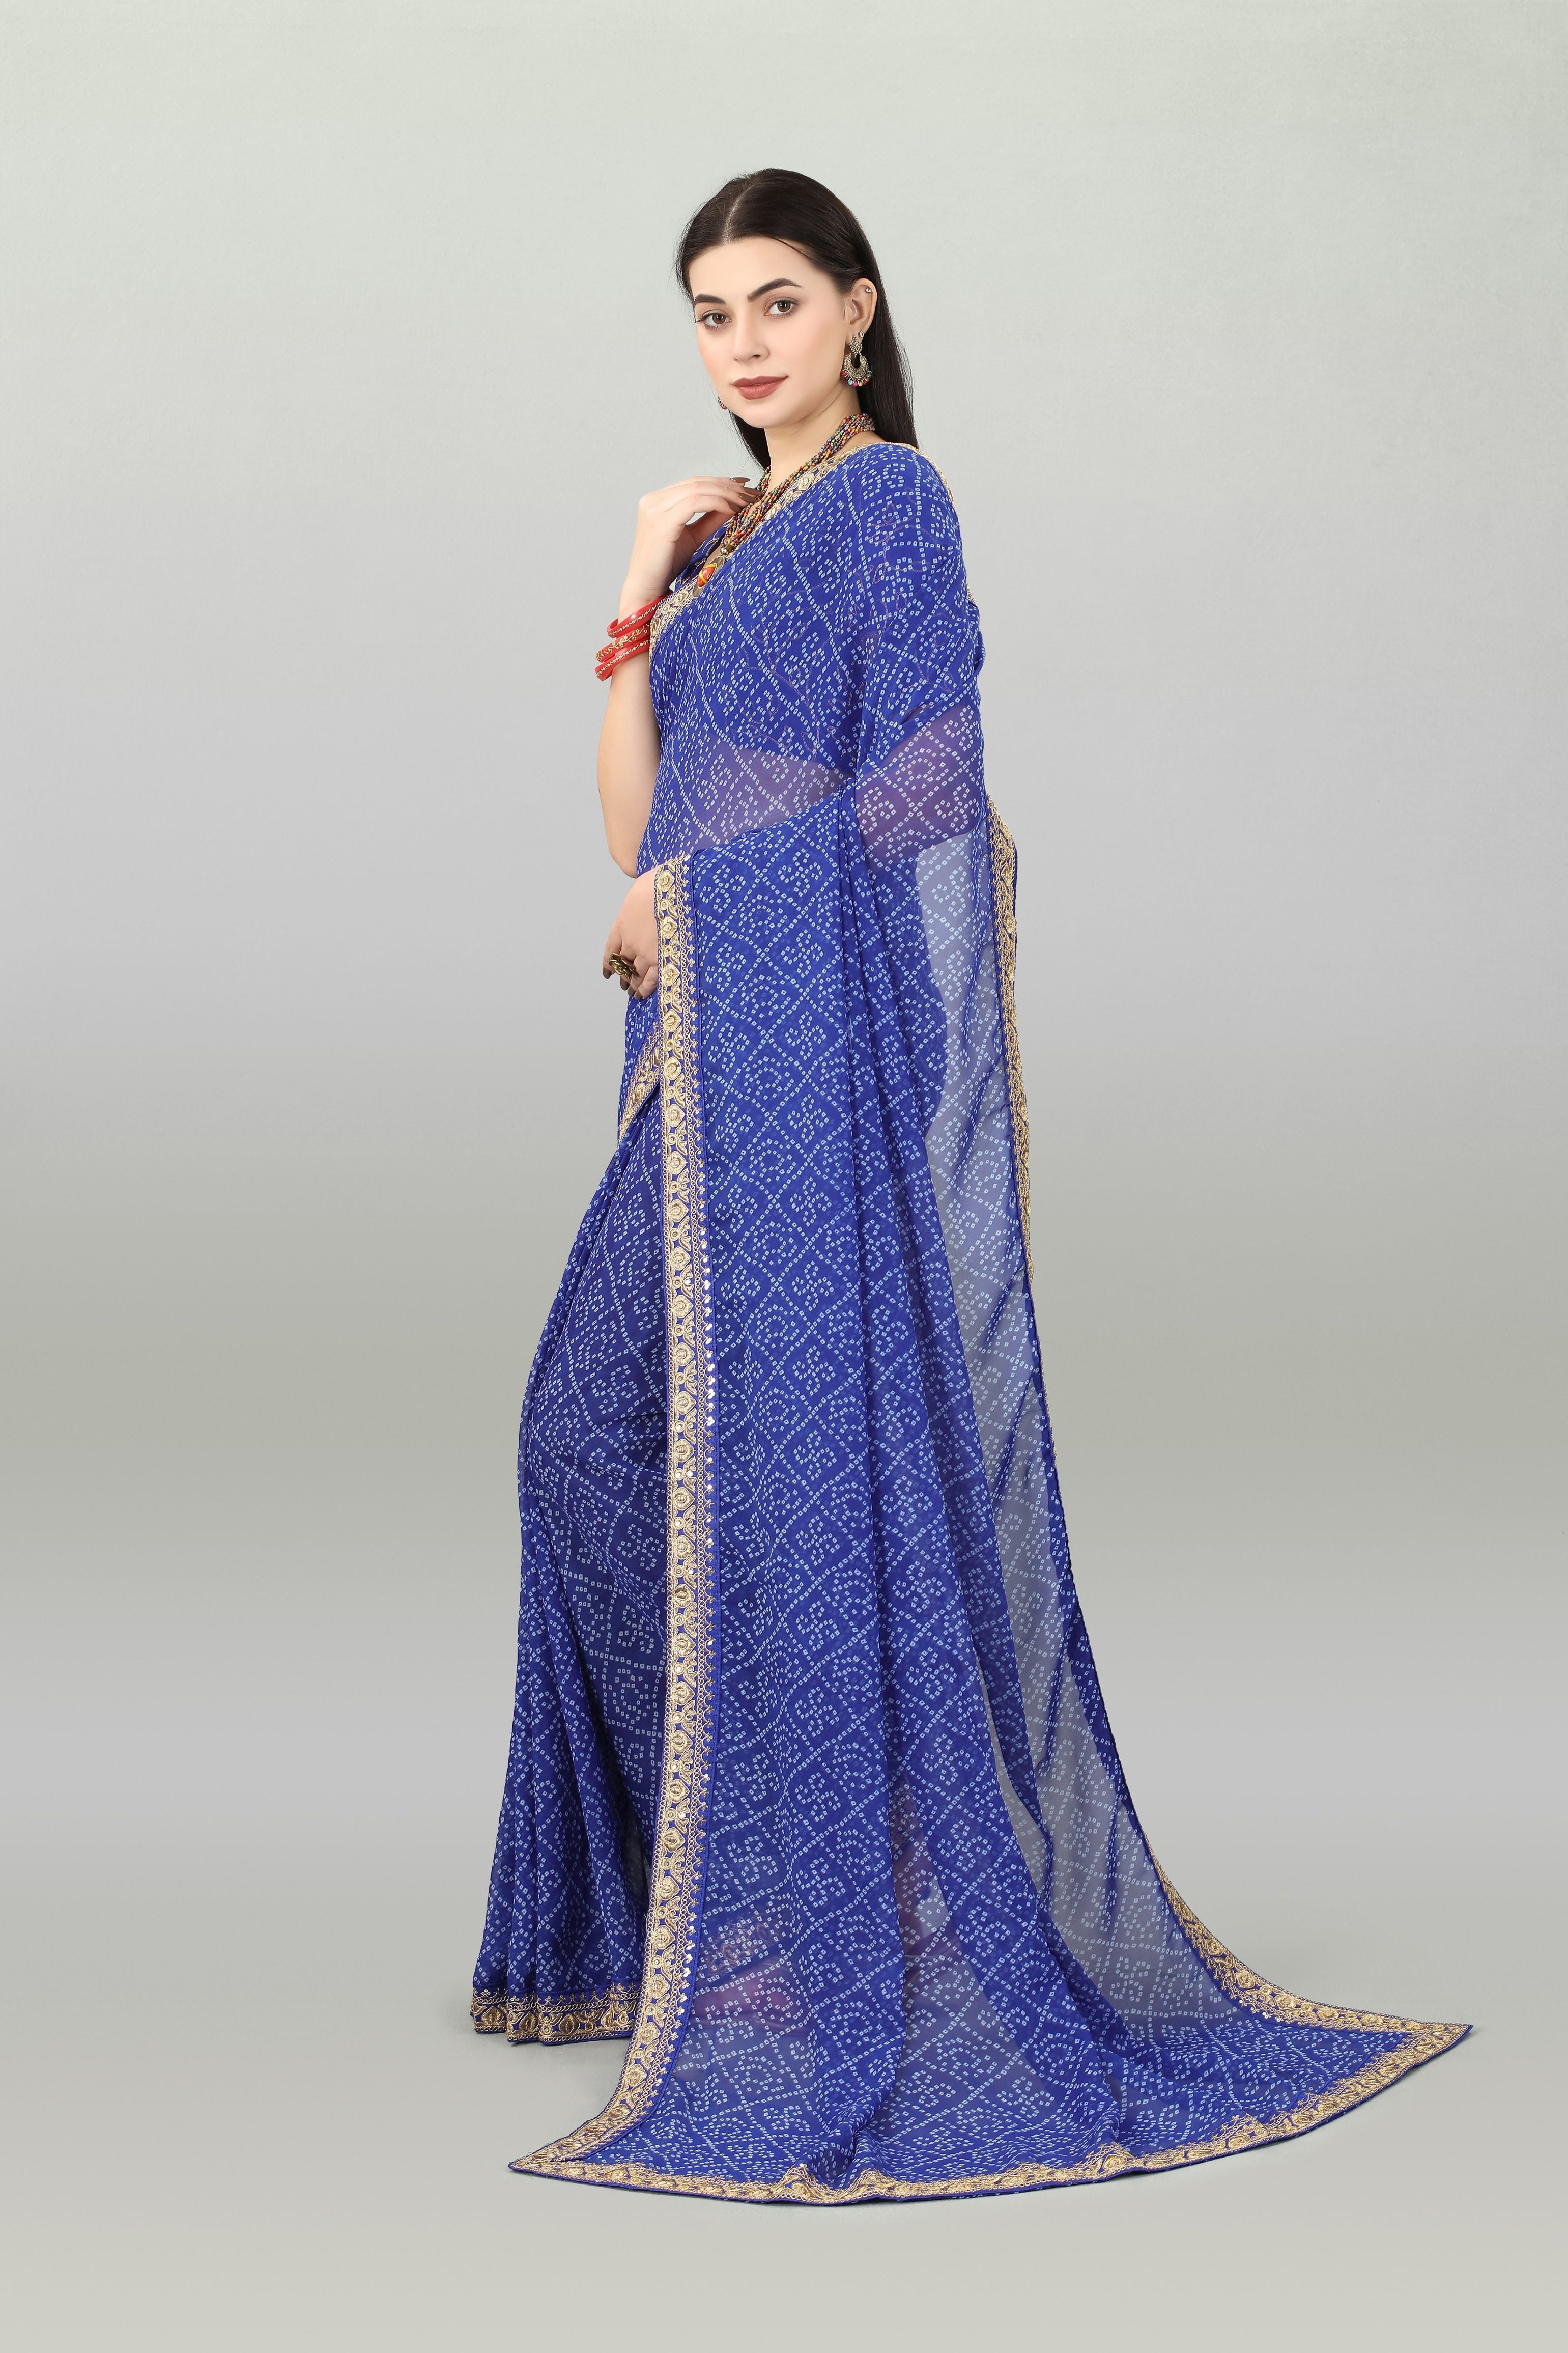 Printed & Embroidery Work In Lace Georgette Blue Bandhani Saree For Women